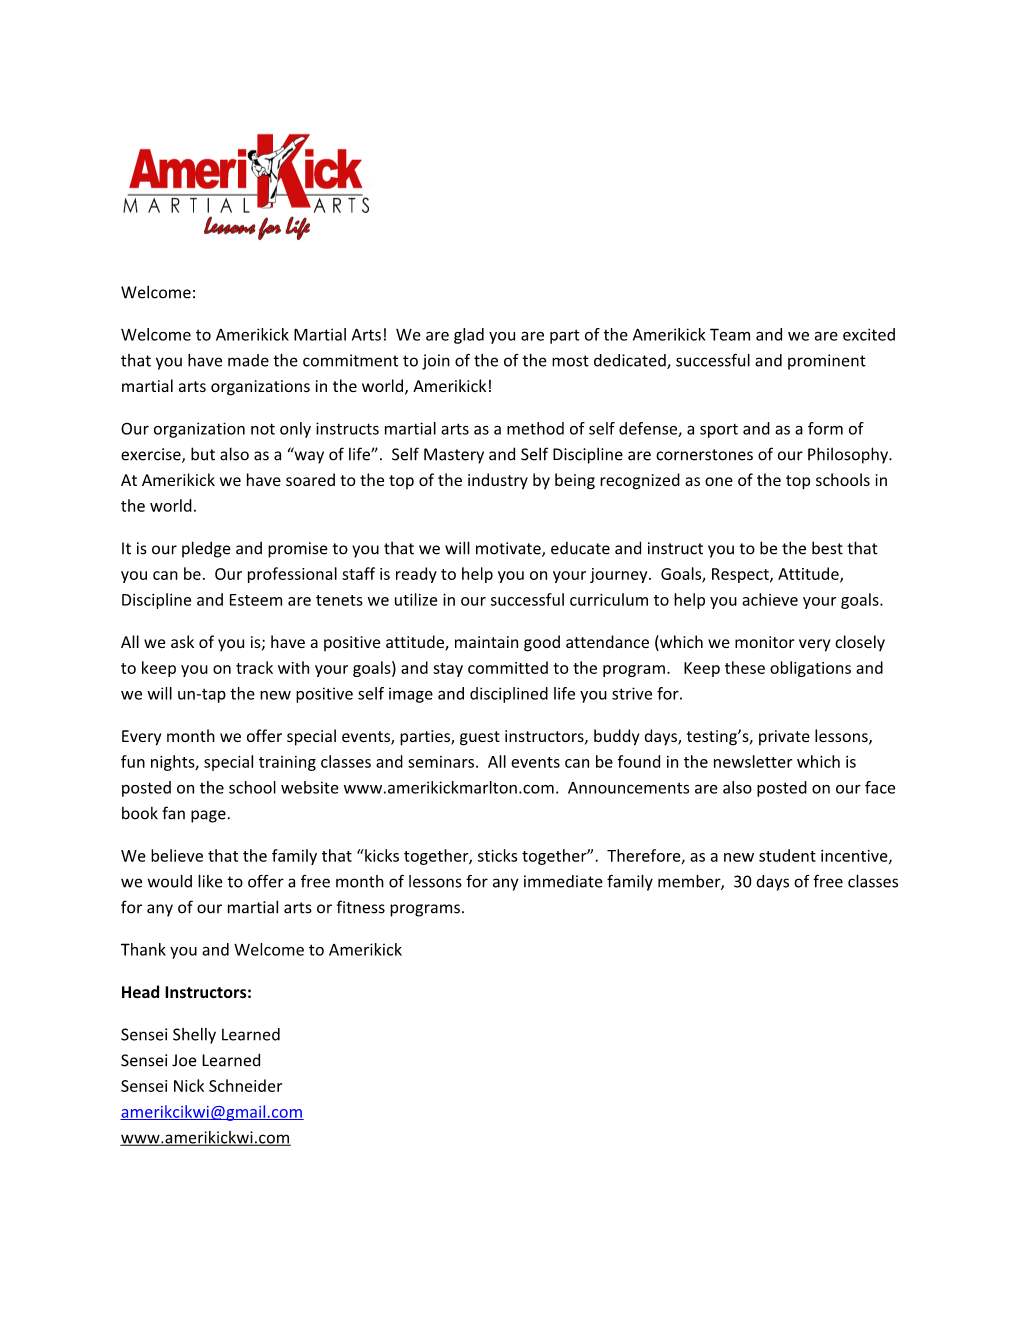 Welcome to Amerikick Martial Arts! We Are Glad You Are Part of the Amerikick Team and We